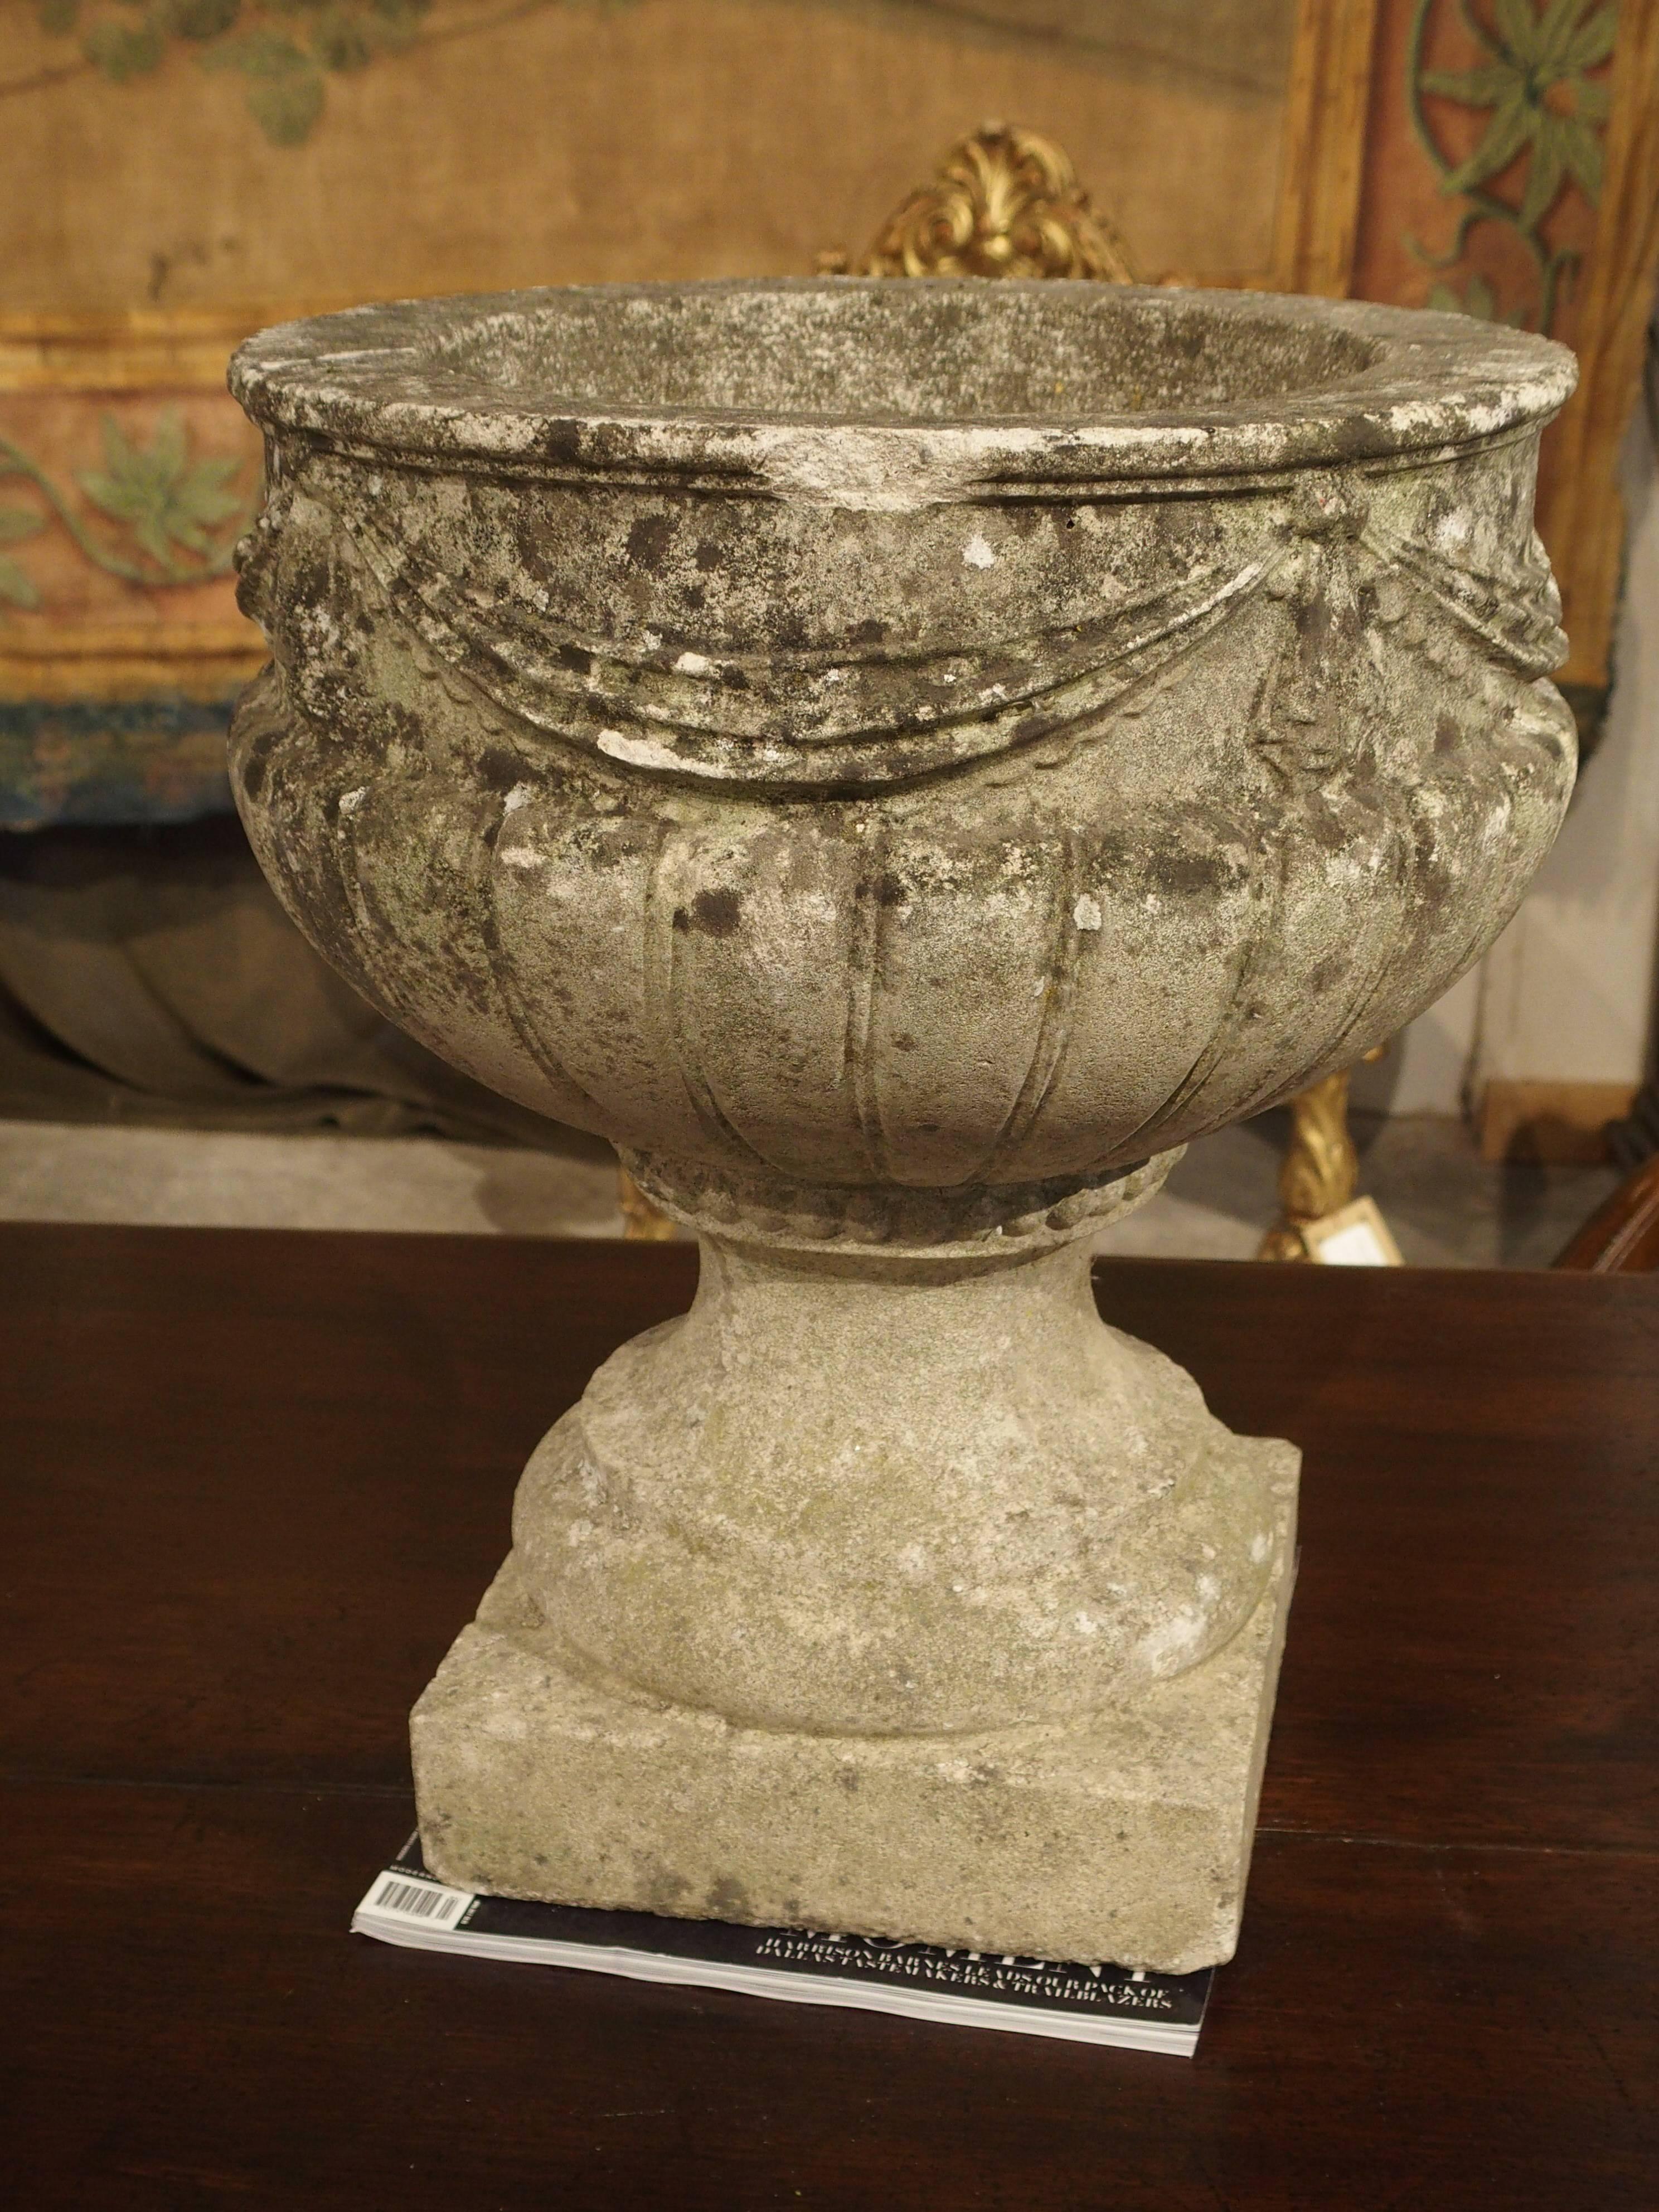 This planter from Belgium has the look of a very old solid limestone planter. It has drapery swags at the frieze and stylized gadrooned lobes beneath. It rests upon a square base. The edges are soft and worn. This beautiful vintage cast stone